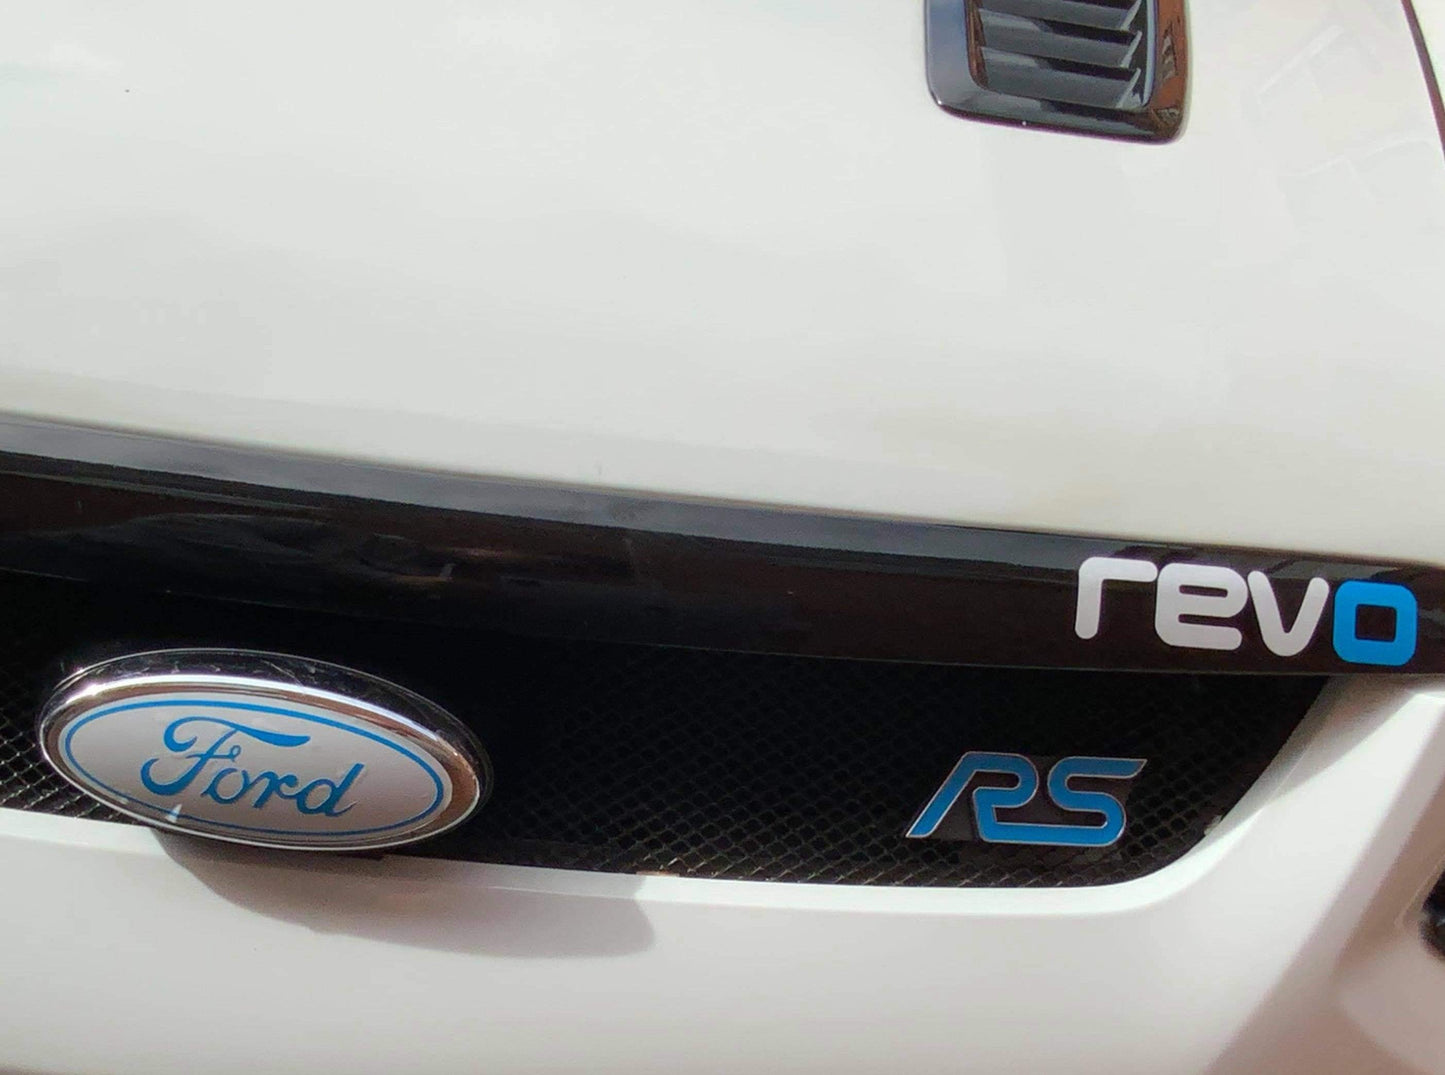 FORD FOCUS RS MK2 inlay decals x4 Vinyl Decal Stickers - rewrapsandgraphics